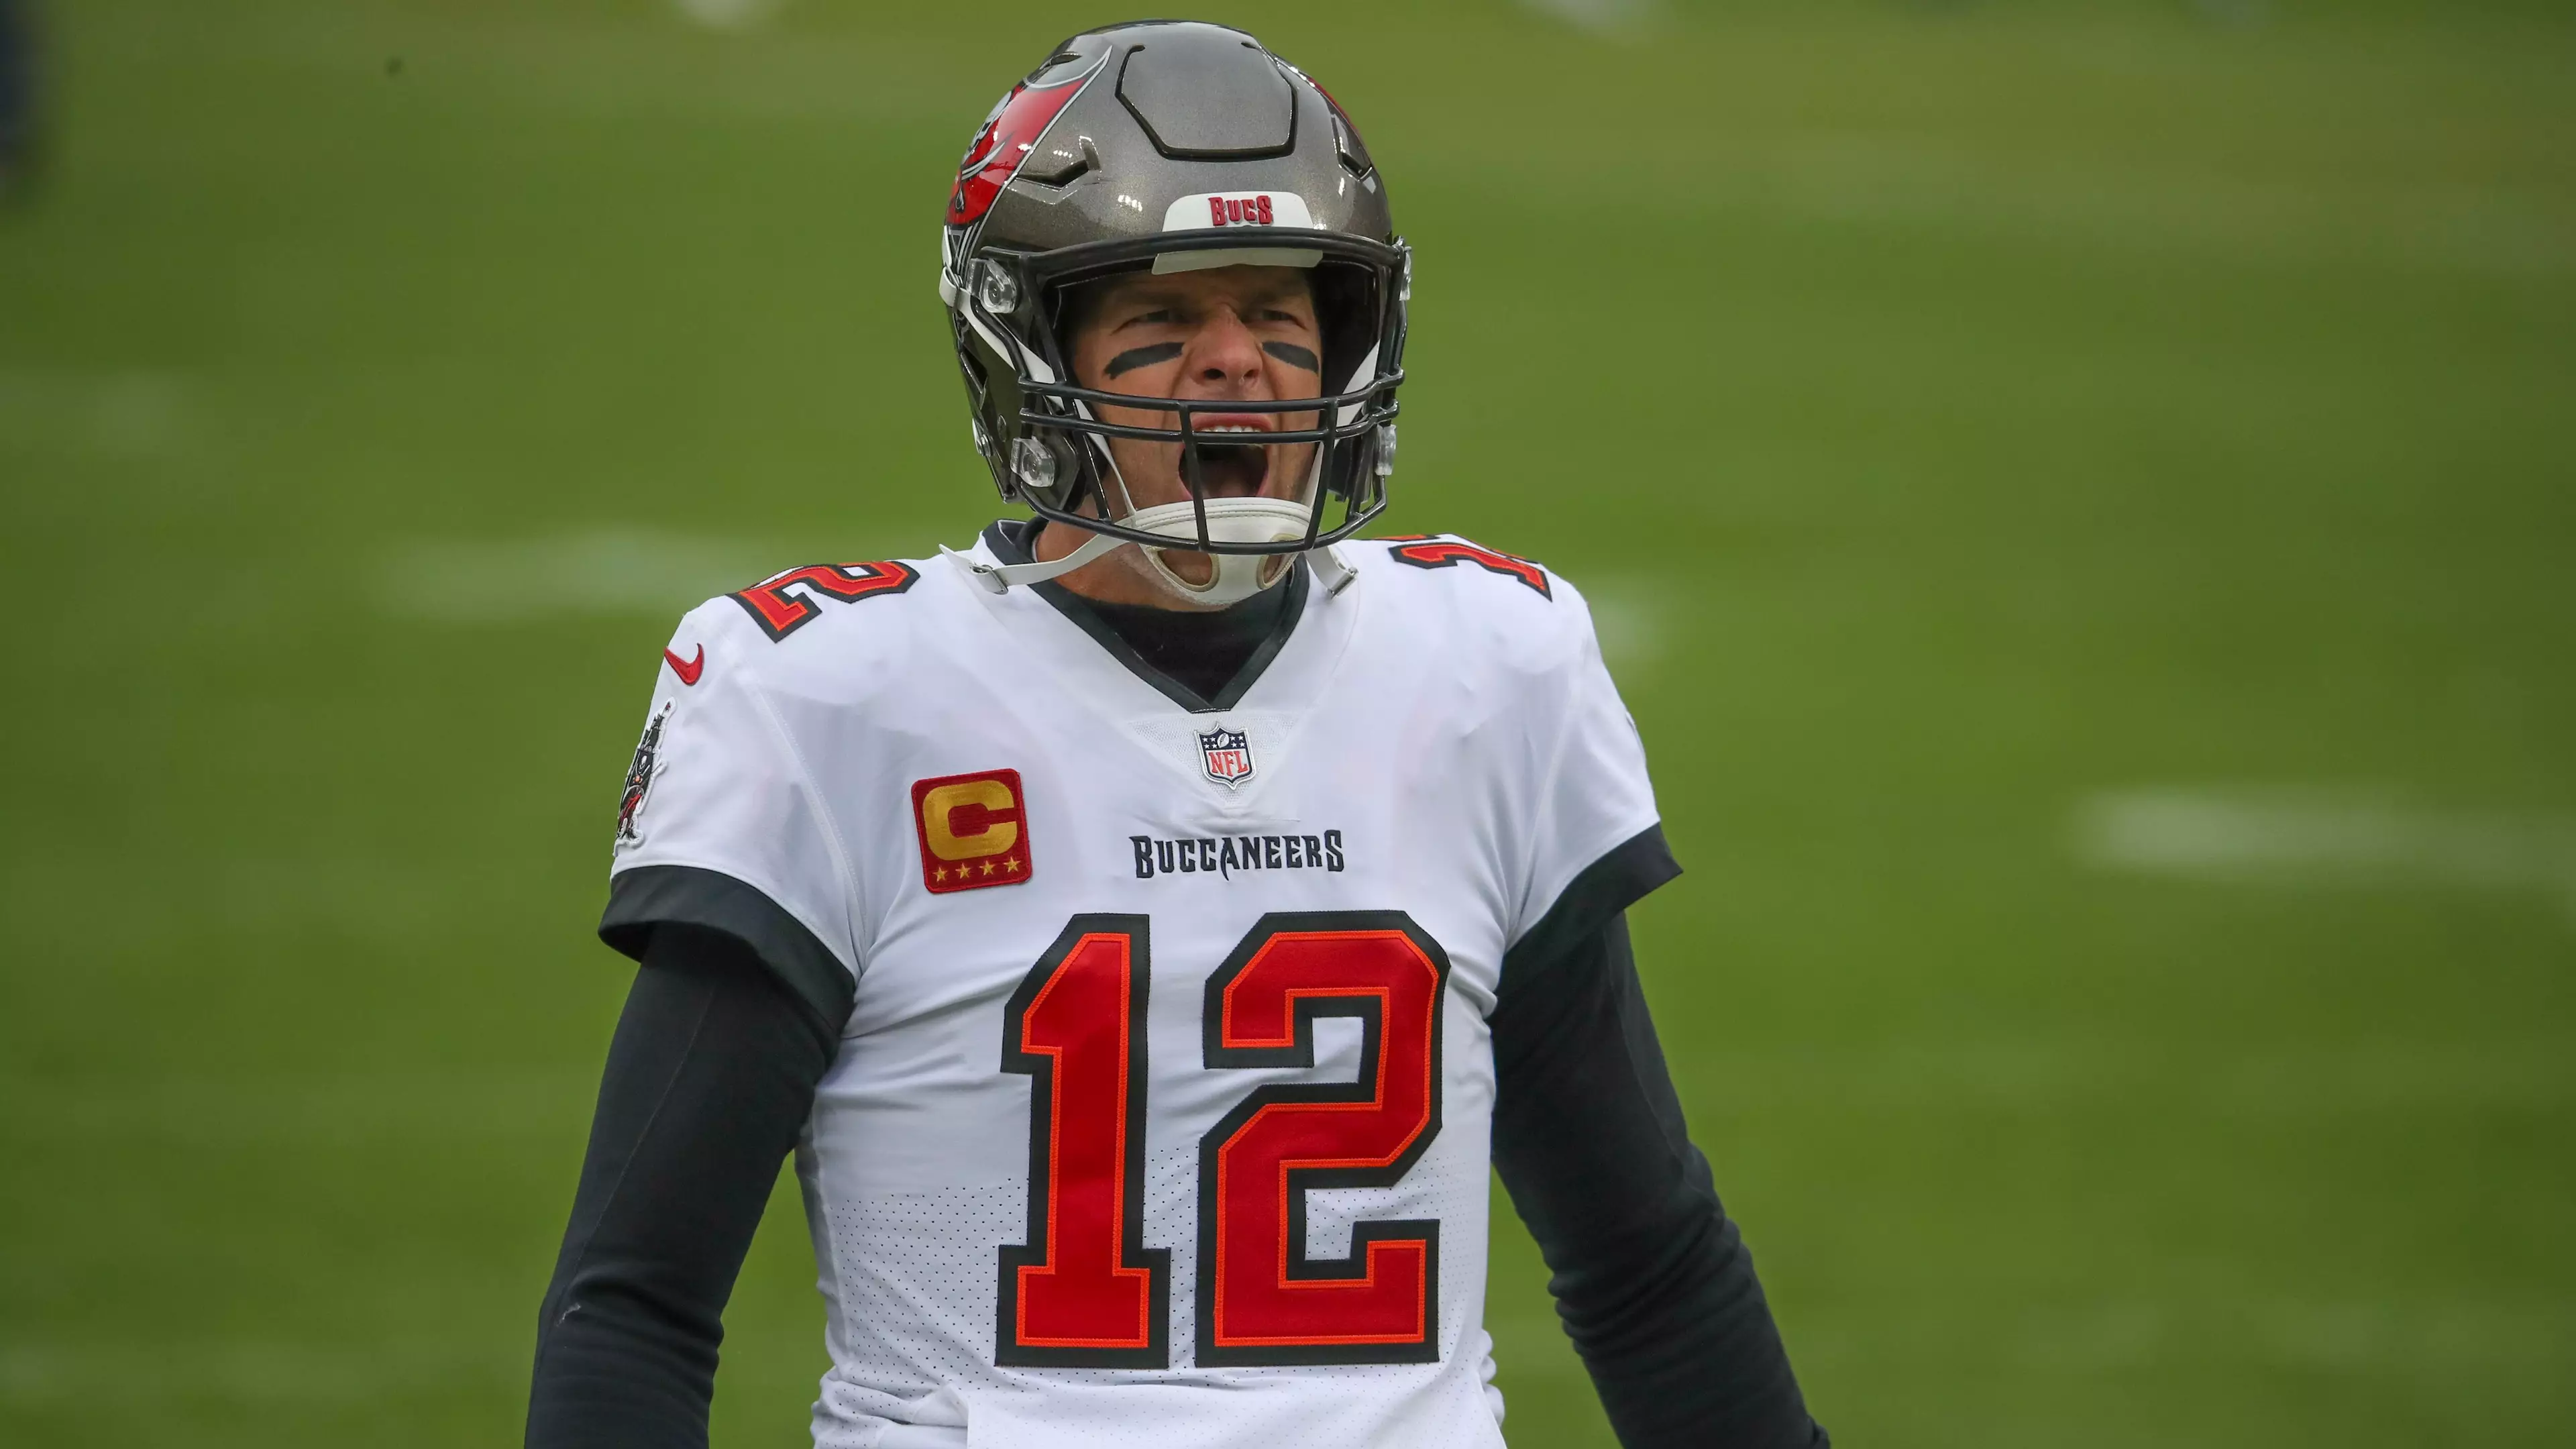 Tom Brady has guided the Bucs to the Super Bowl in his first year with the team.